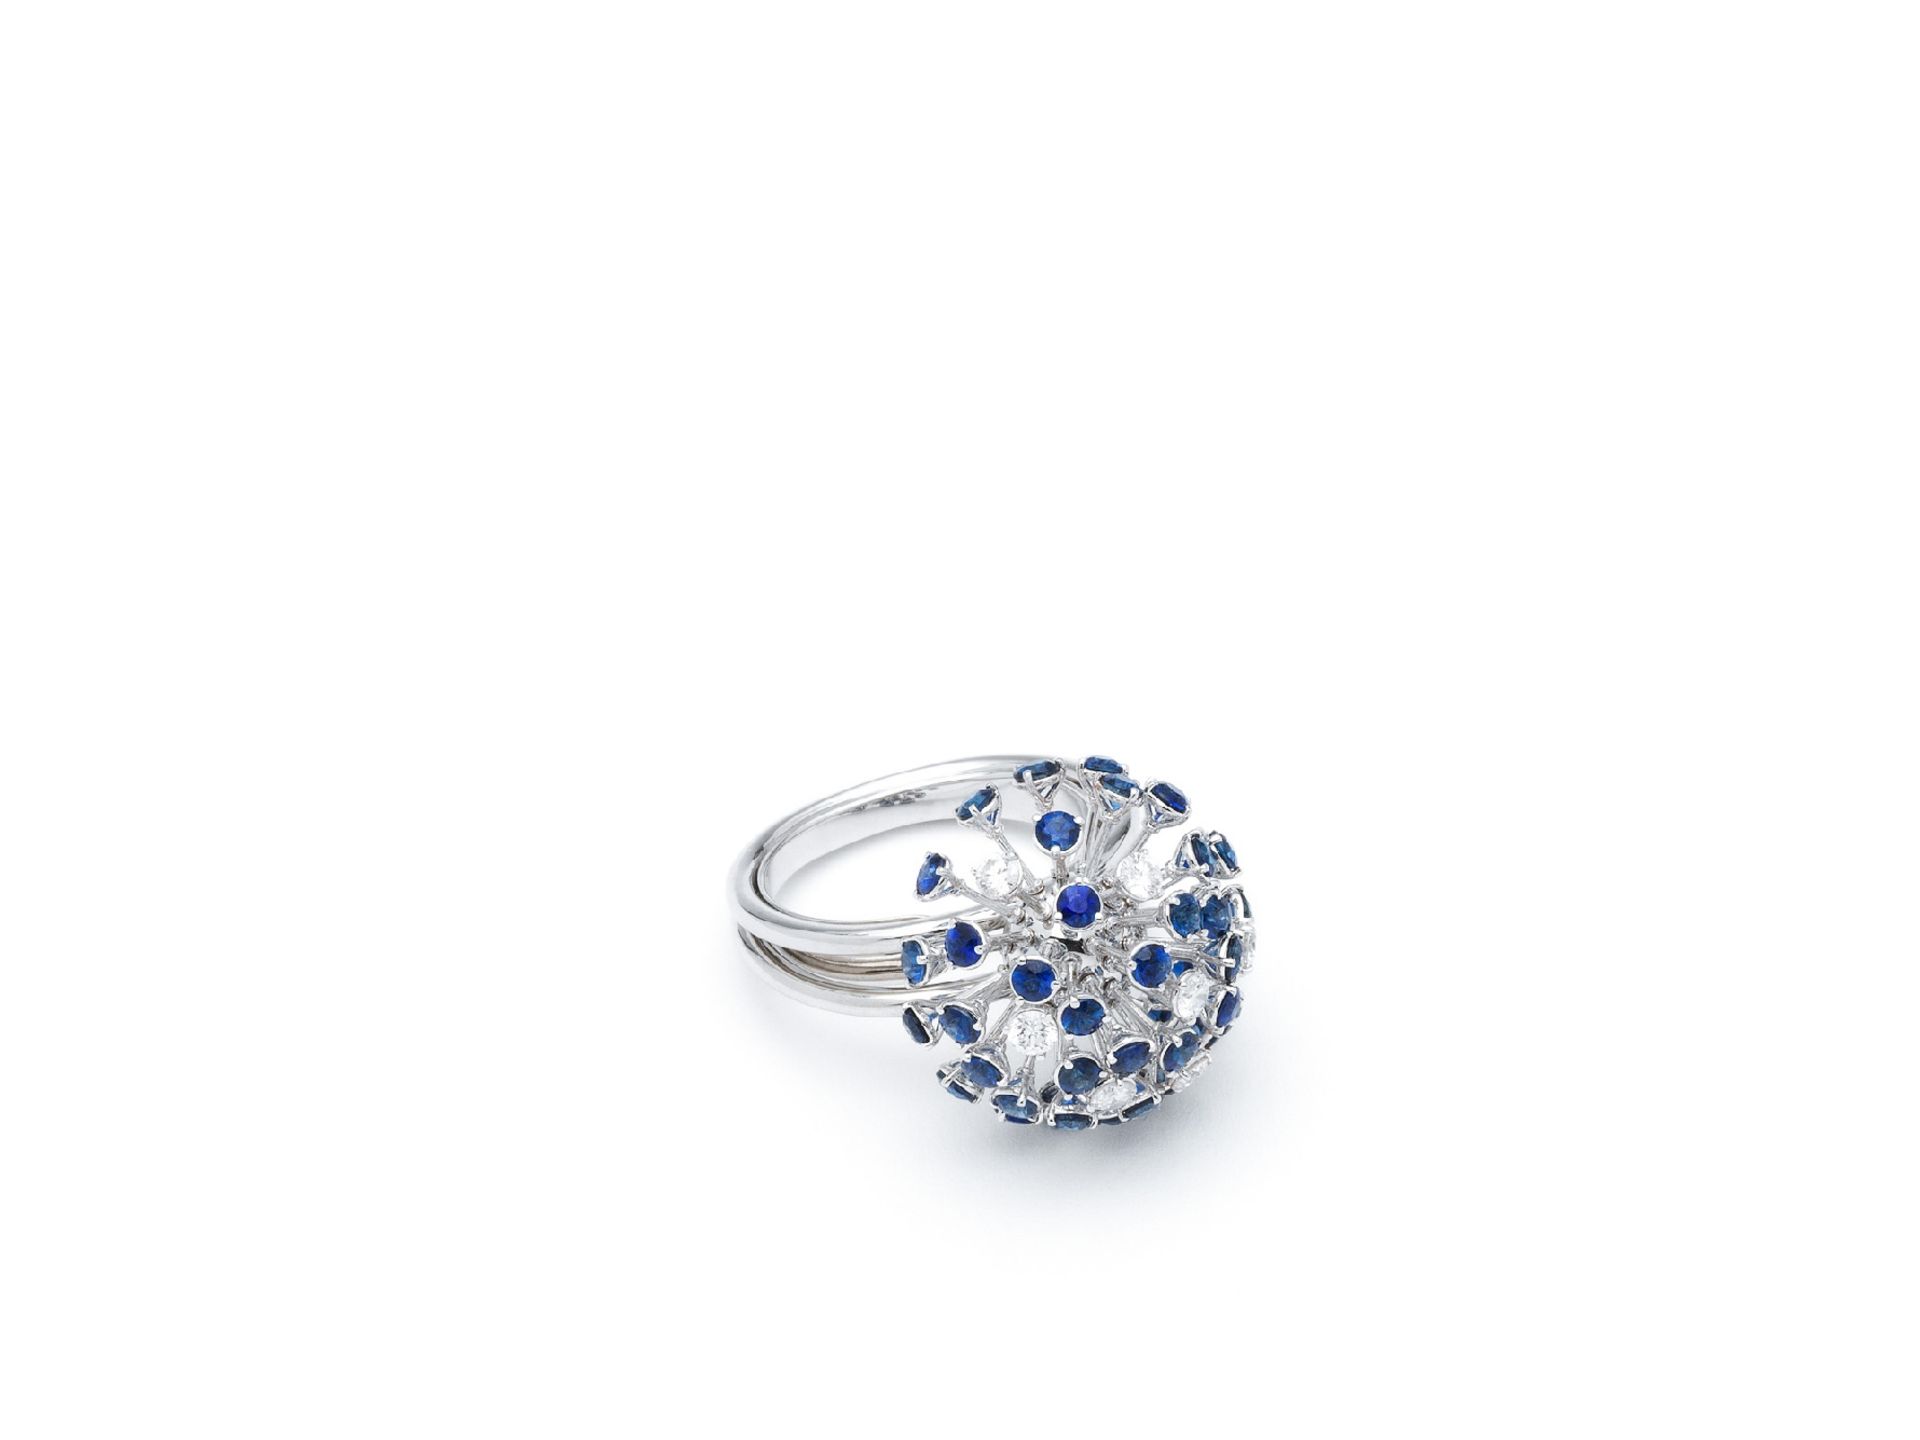 Ring with brilliant diamonds and sapphires - Image 3 of 5